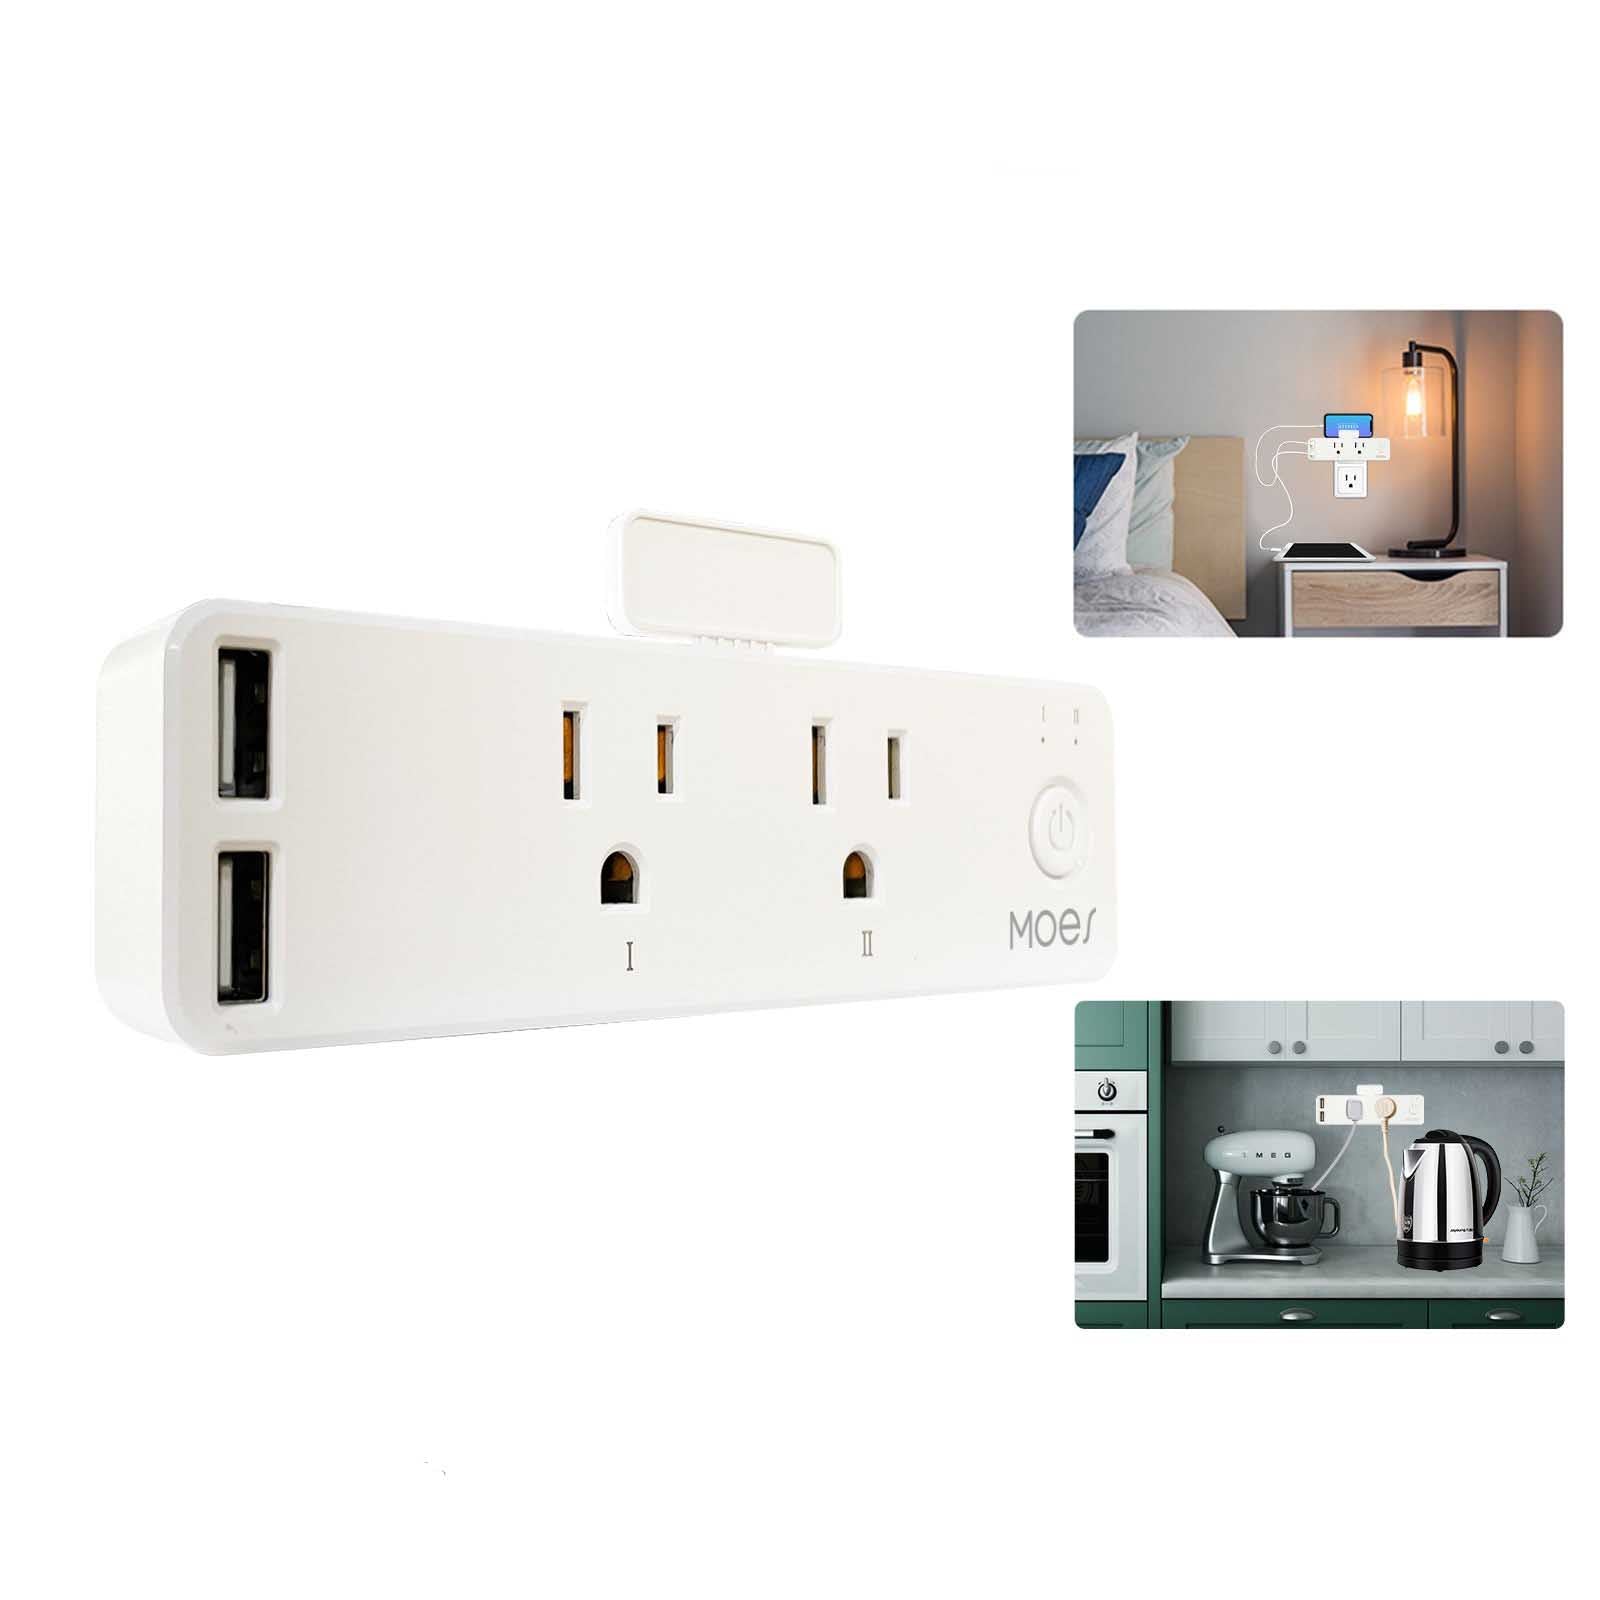 Multi Plug Outlets, Wall Outlet Extender with Night Light and Outlet Shelf,  Surge Protector 4 USB Ports(1 USB C), USB Wall Charger Power Strip